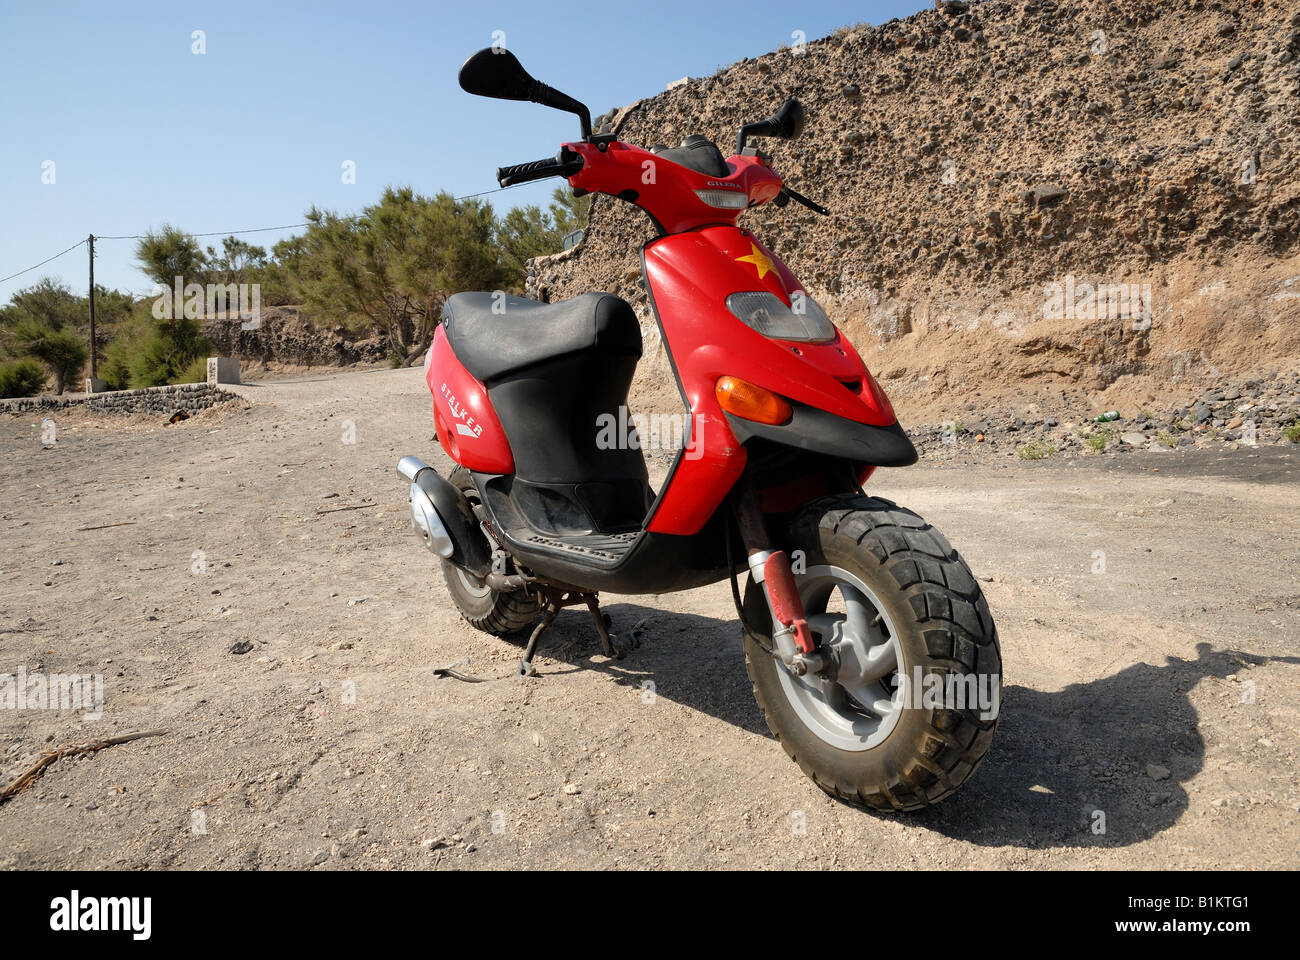 Scooter rouge Banque D'Images